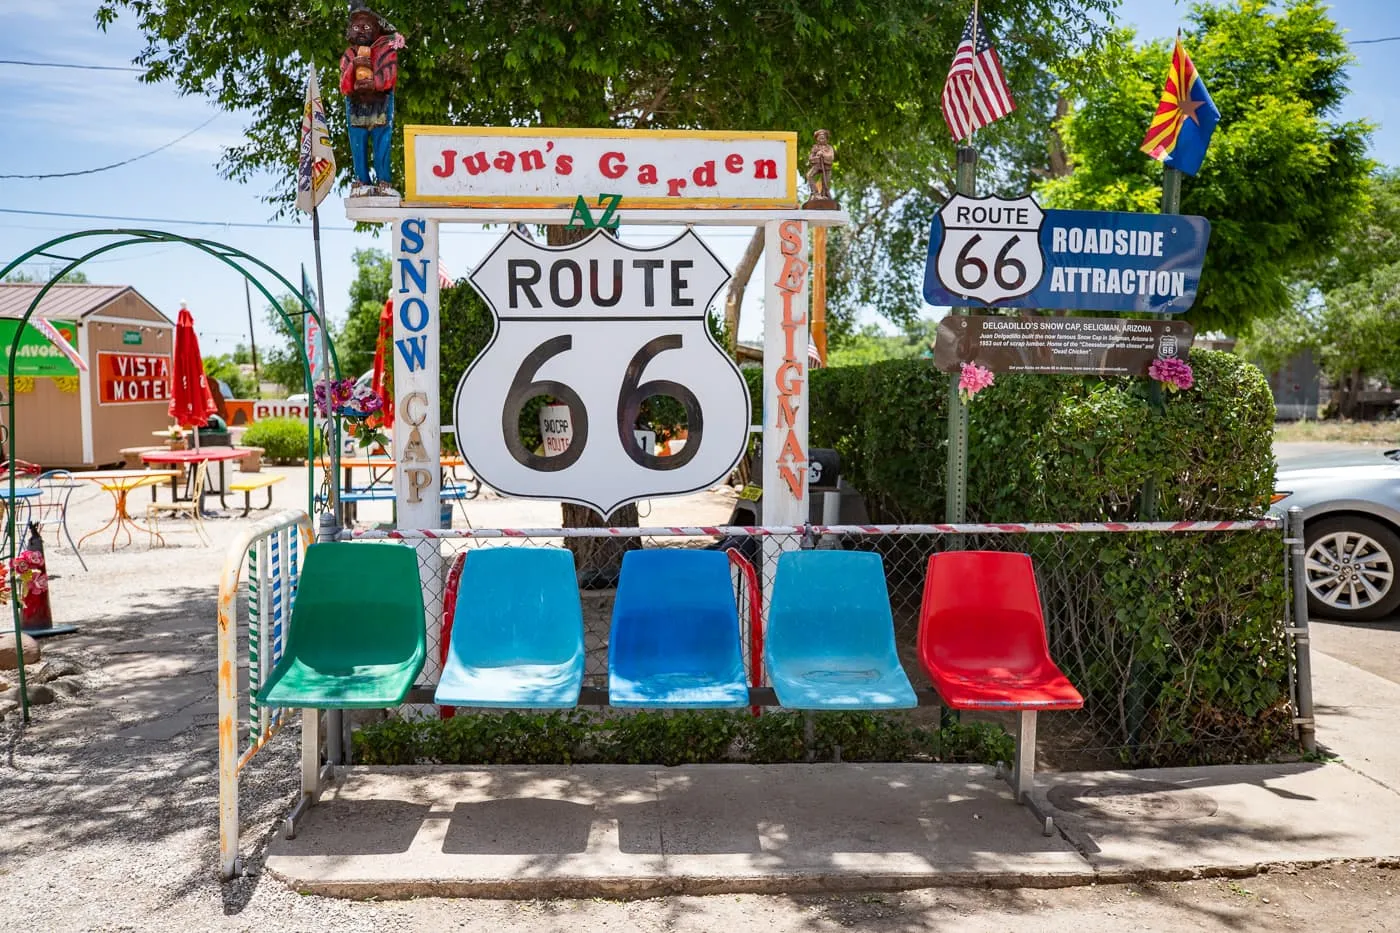 Juan's Garden and Route 66 Photo Op at Delgadillo’s Snow Cap in Seligman, Arizona - Route 66 restaurant and Drive-In Diner